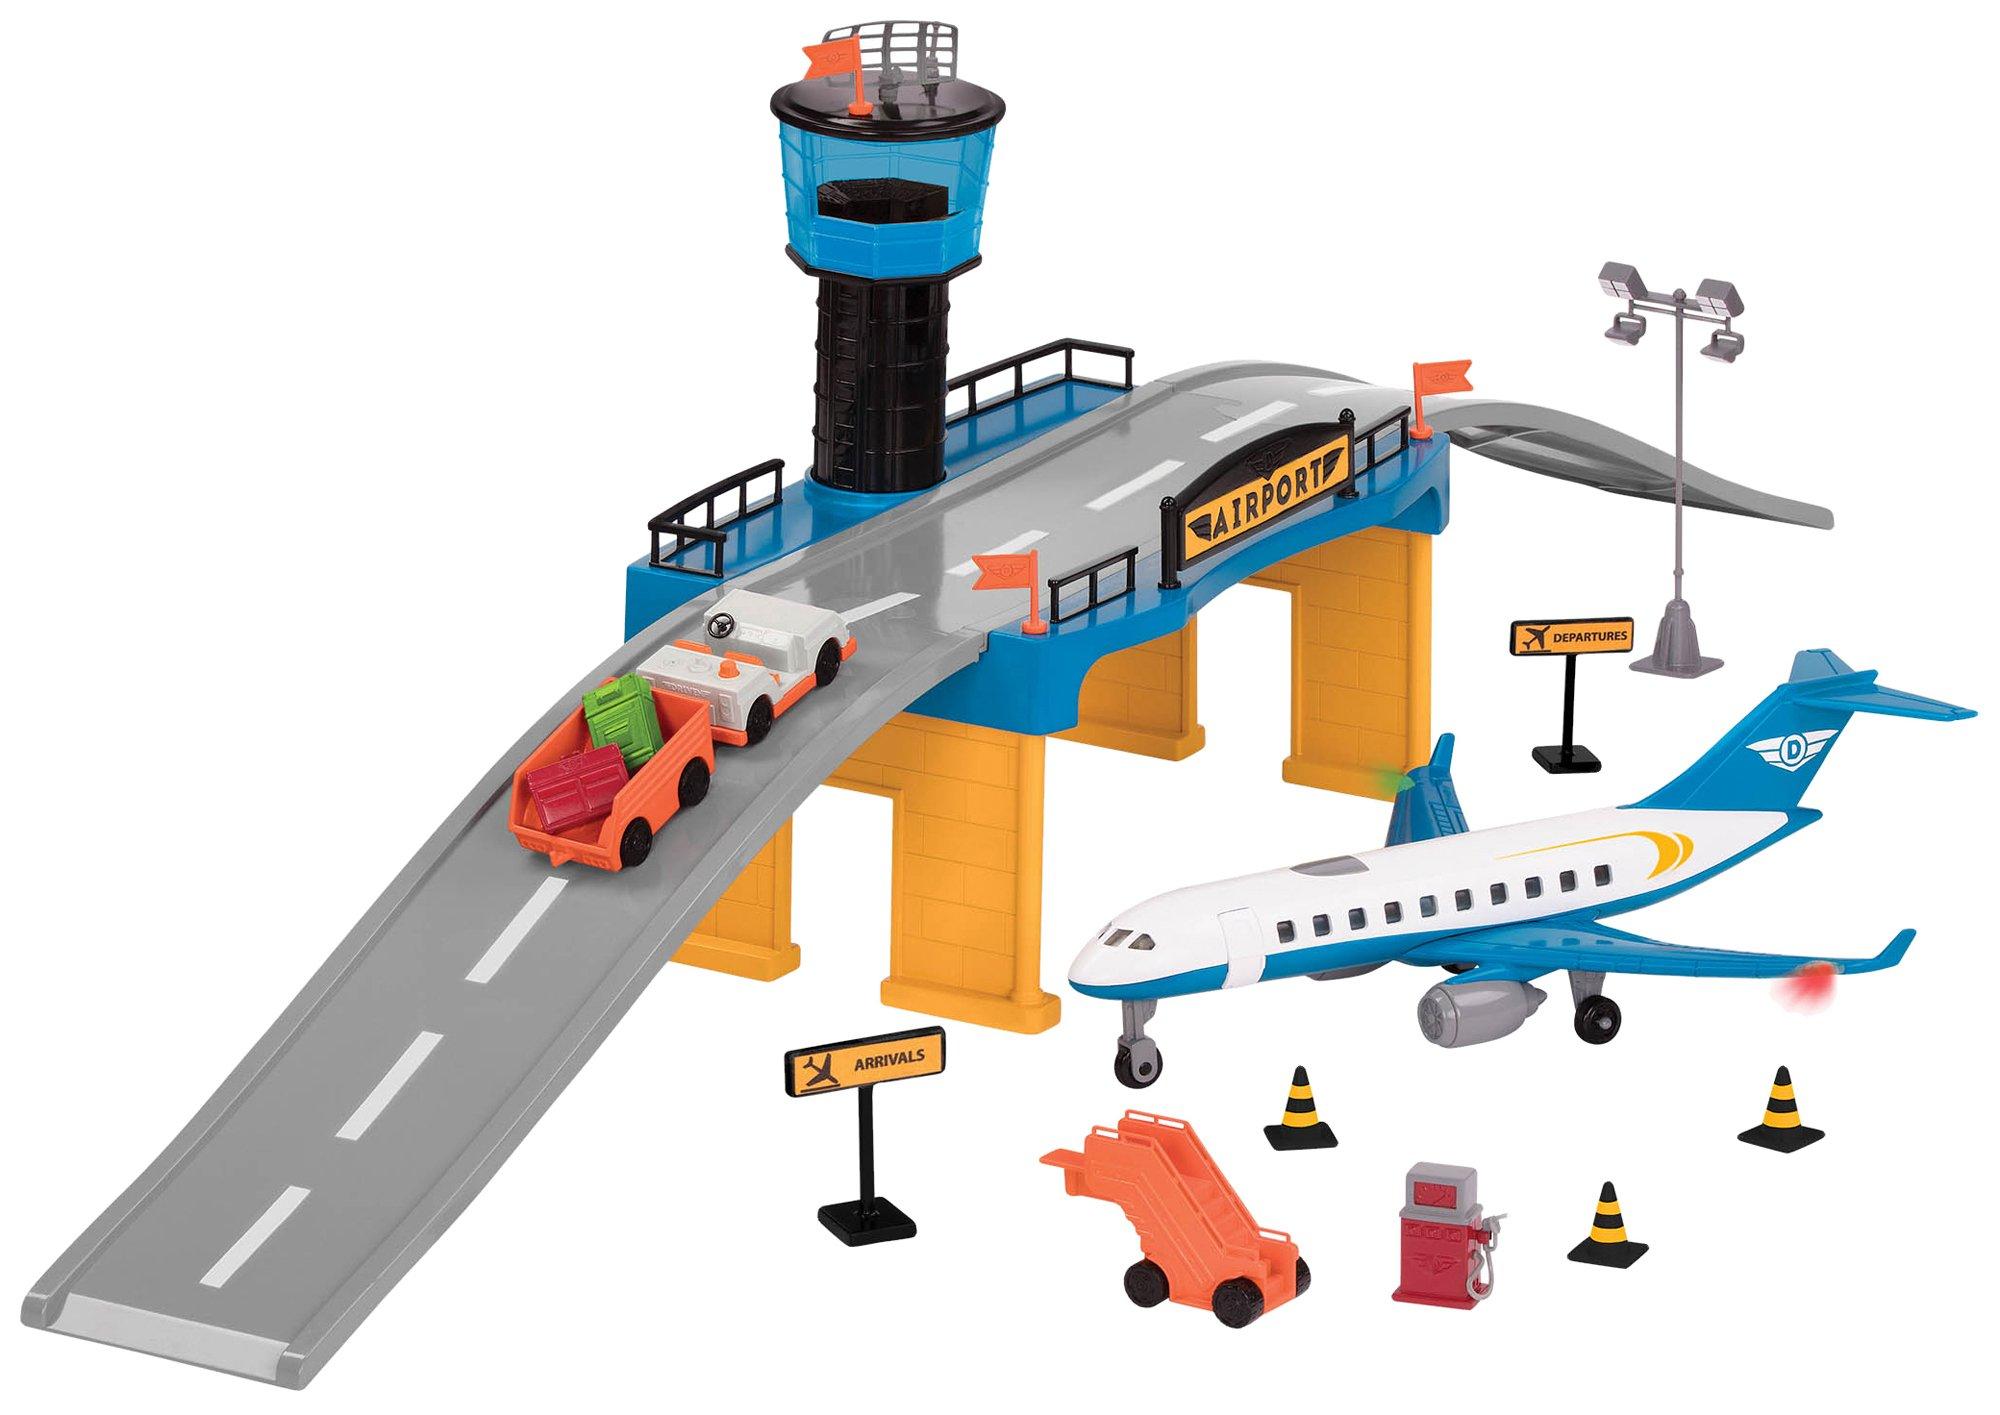 Airport And Airplane Toy Playset